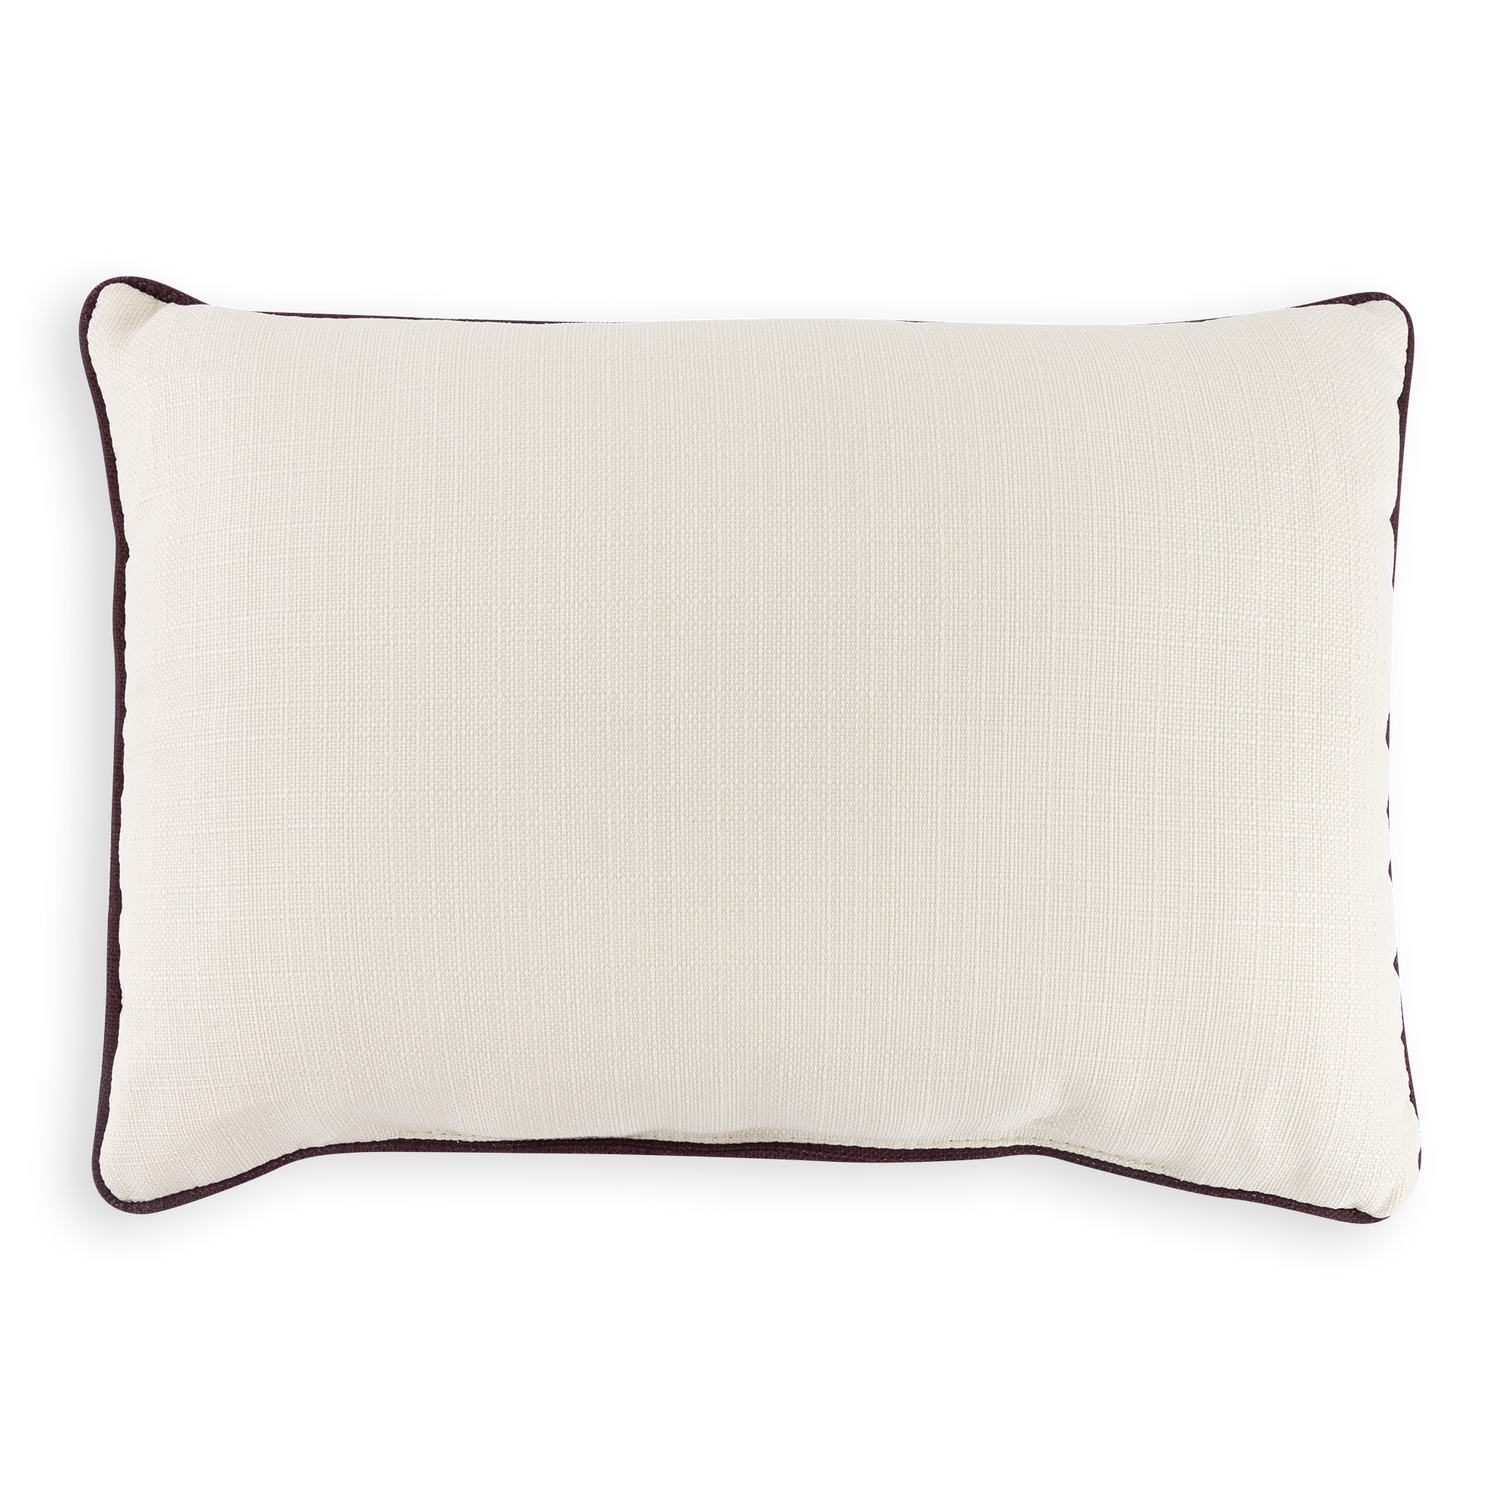 Texas A&M University Outlined Pillow